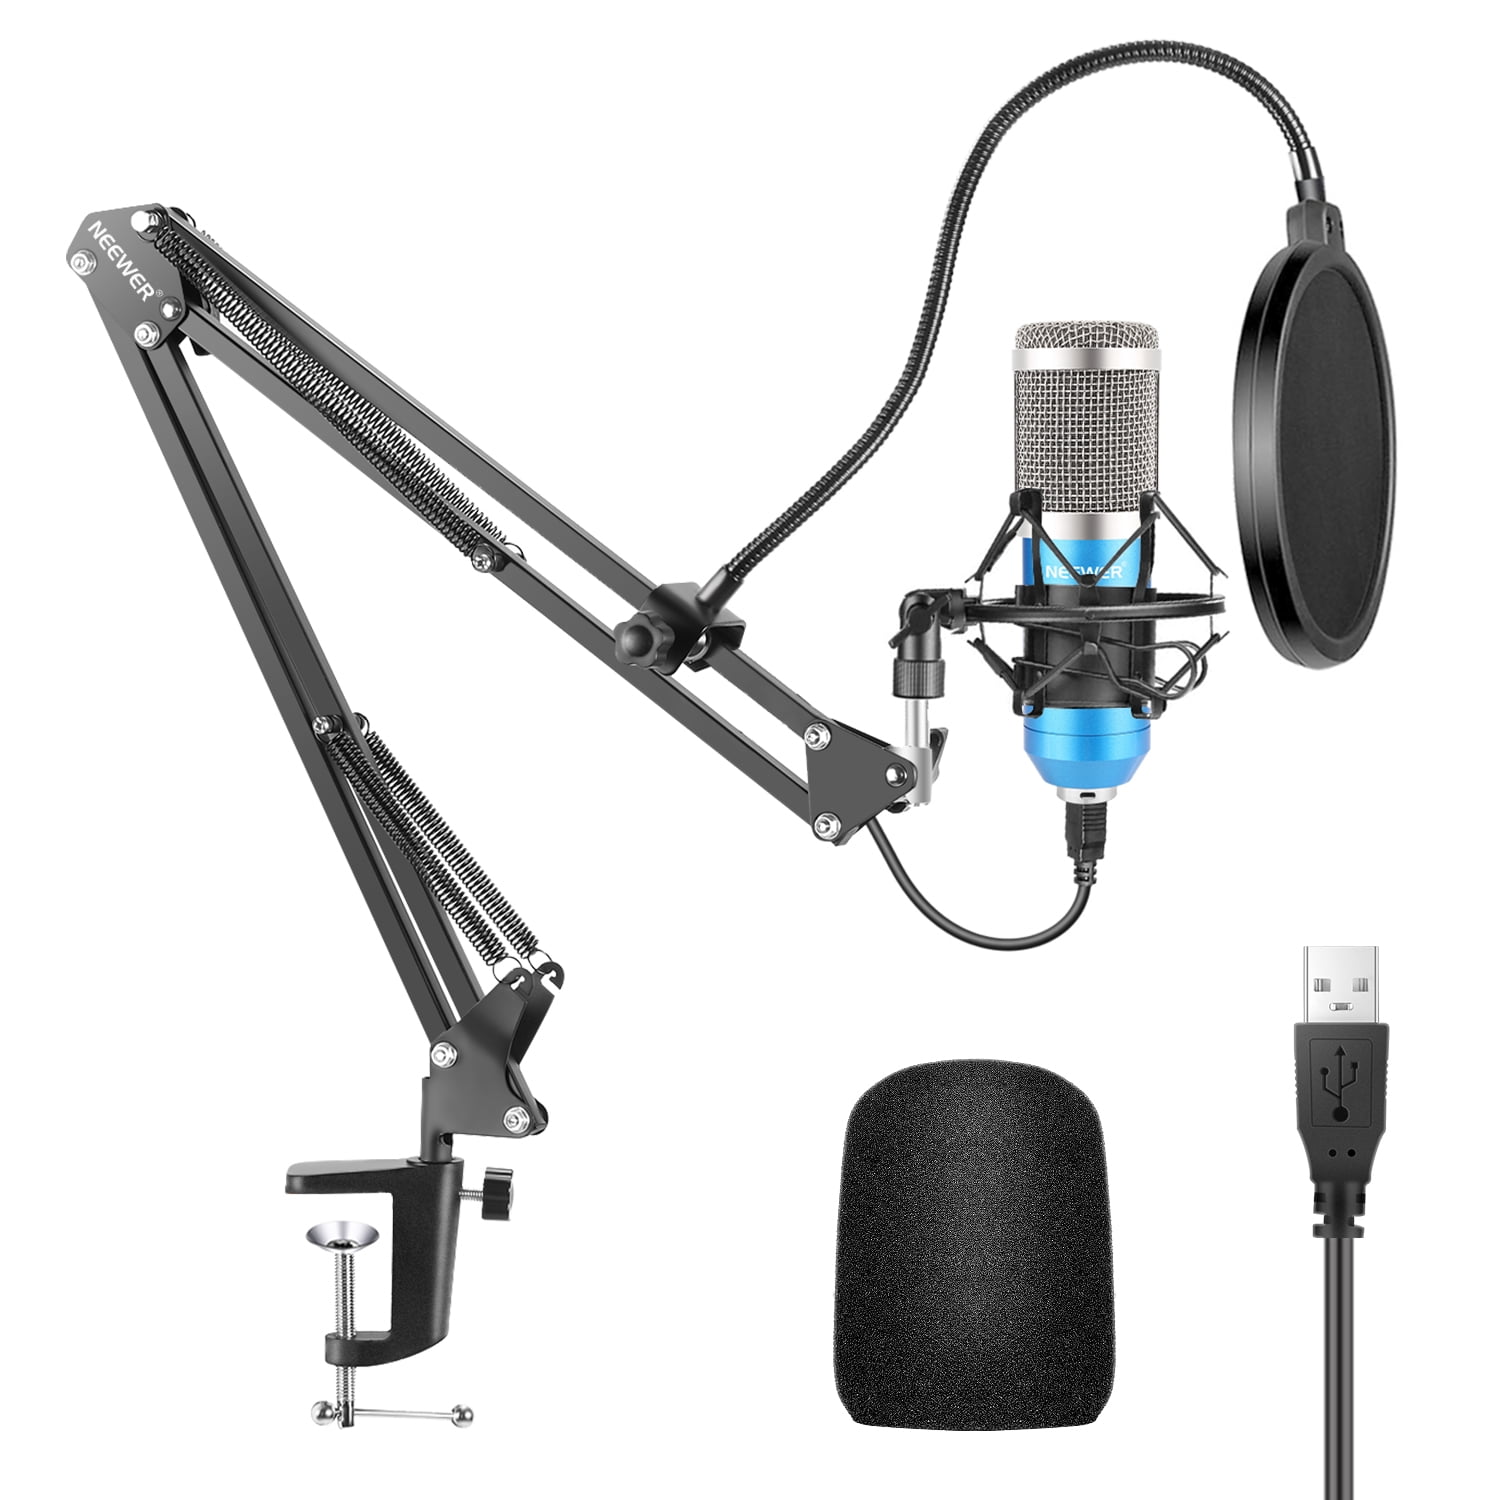 Neewer USB Microphone Kit 192KHZ/24BIT Plug&amp;Play Computer Cardioid Mic Podcast Condenser Microphone with Professional Sound Chipset for PC Karaoke/YouTube/Gaming Record, Arm Stand/Shock Mount (Blue)